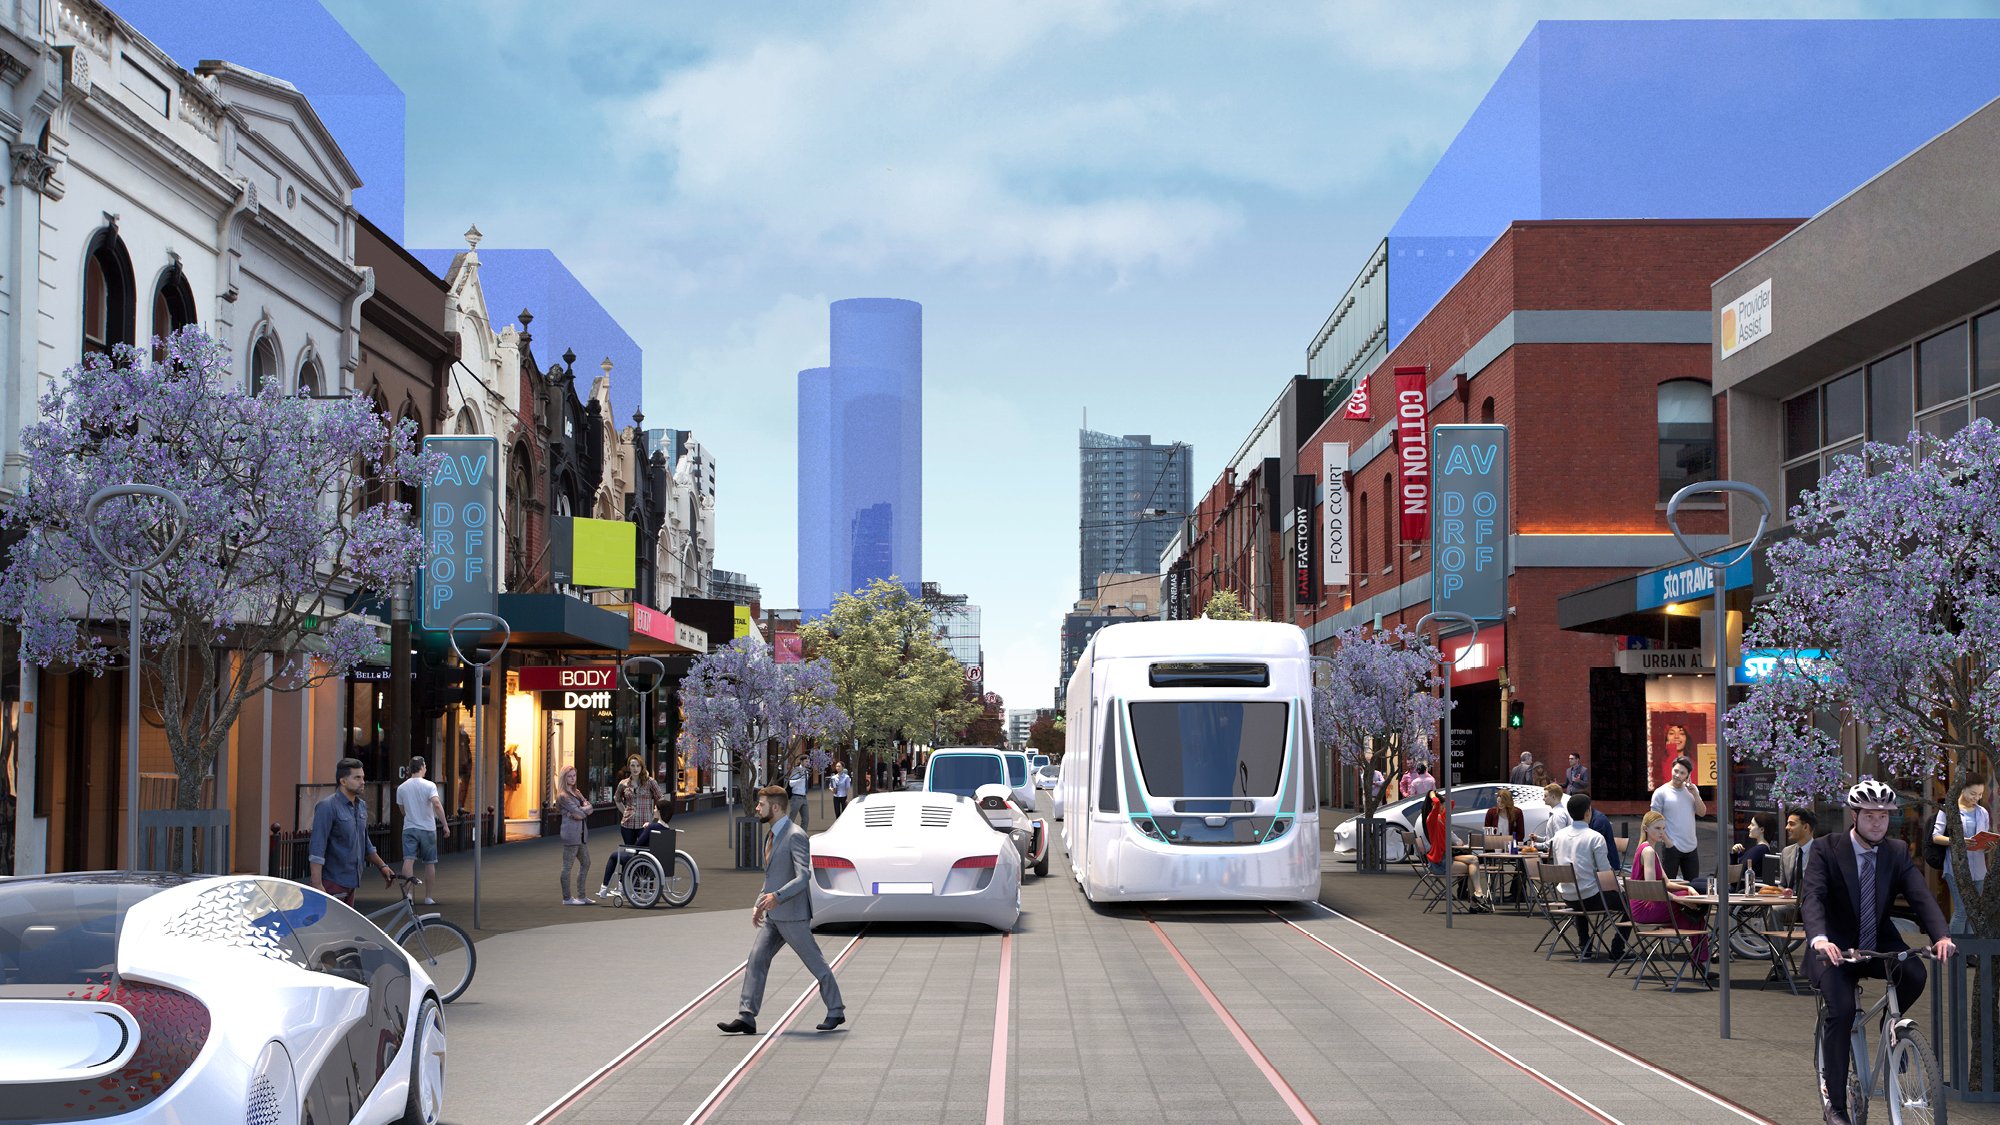 Chapel Street in Melbourne reimagined with 100% automated shared and zero emissions vehicles